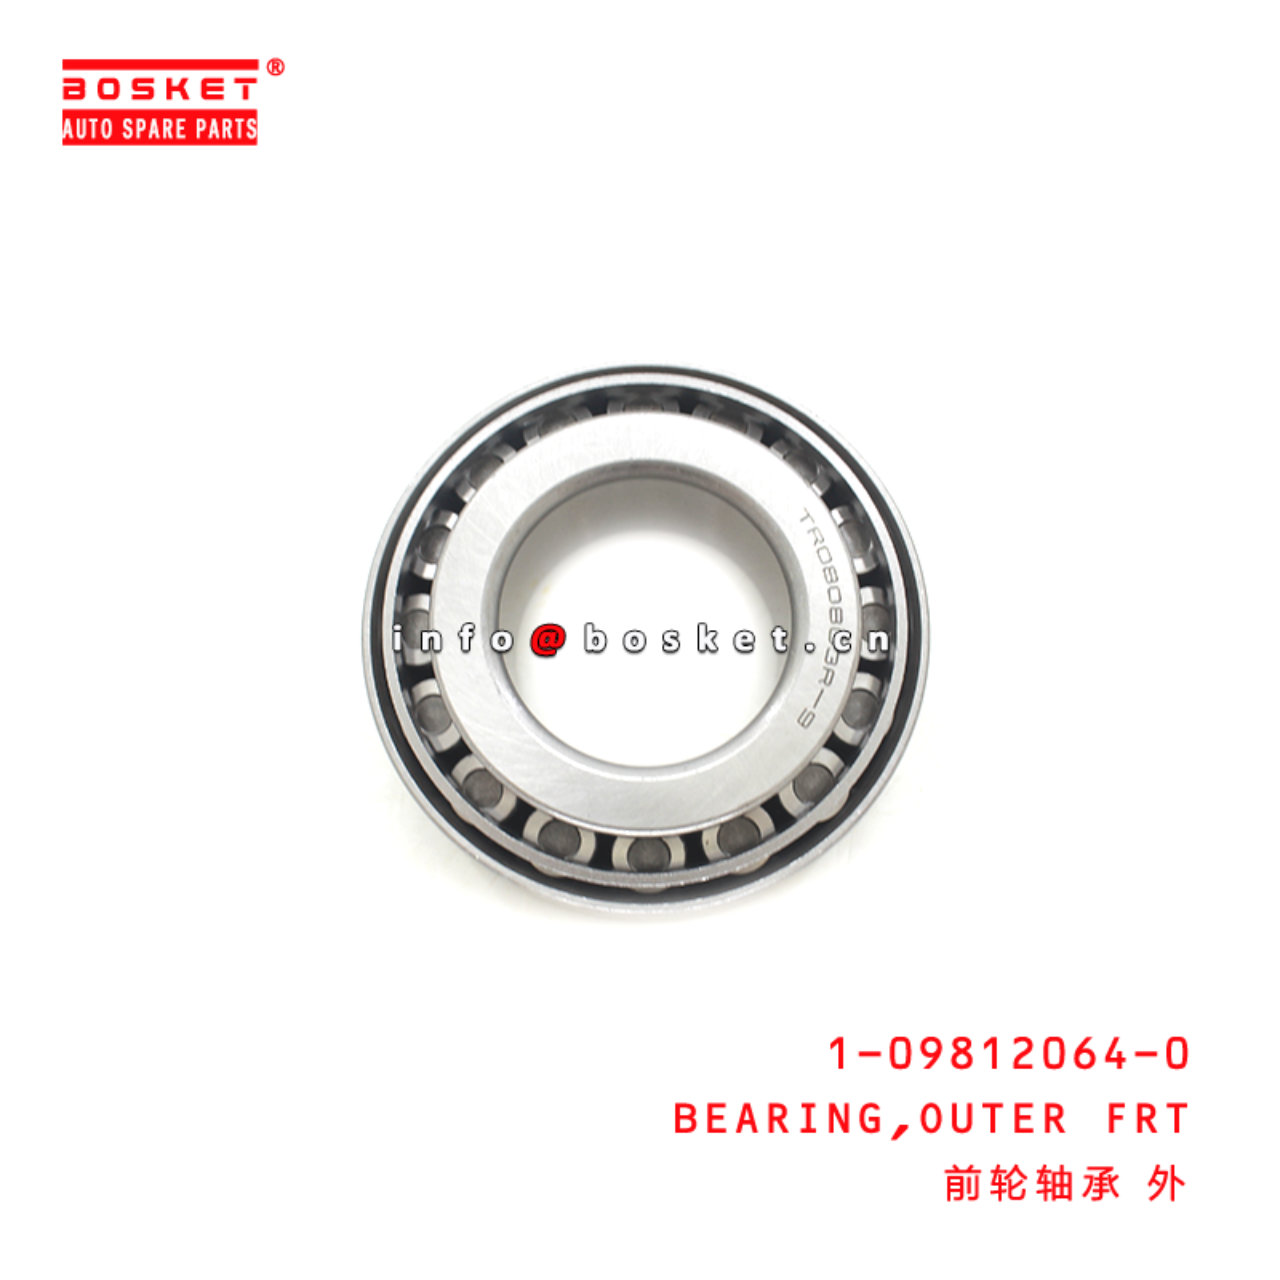 1-09812064-0 Outer Front Bearing Suitable for ISUZU HINO700